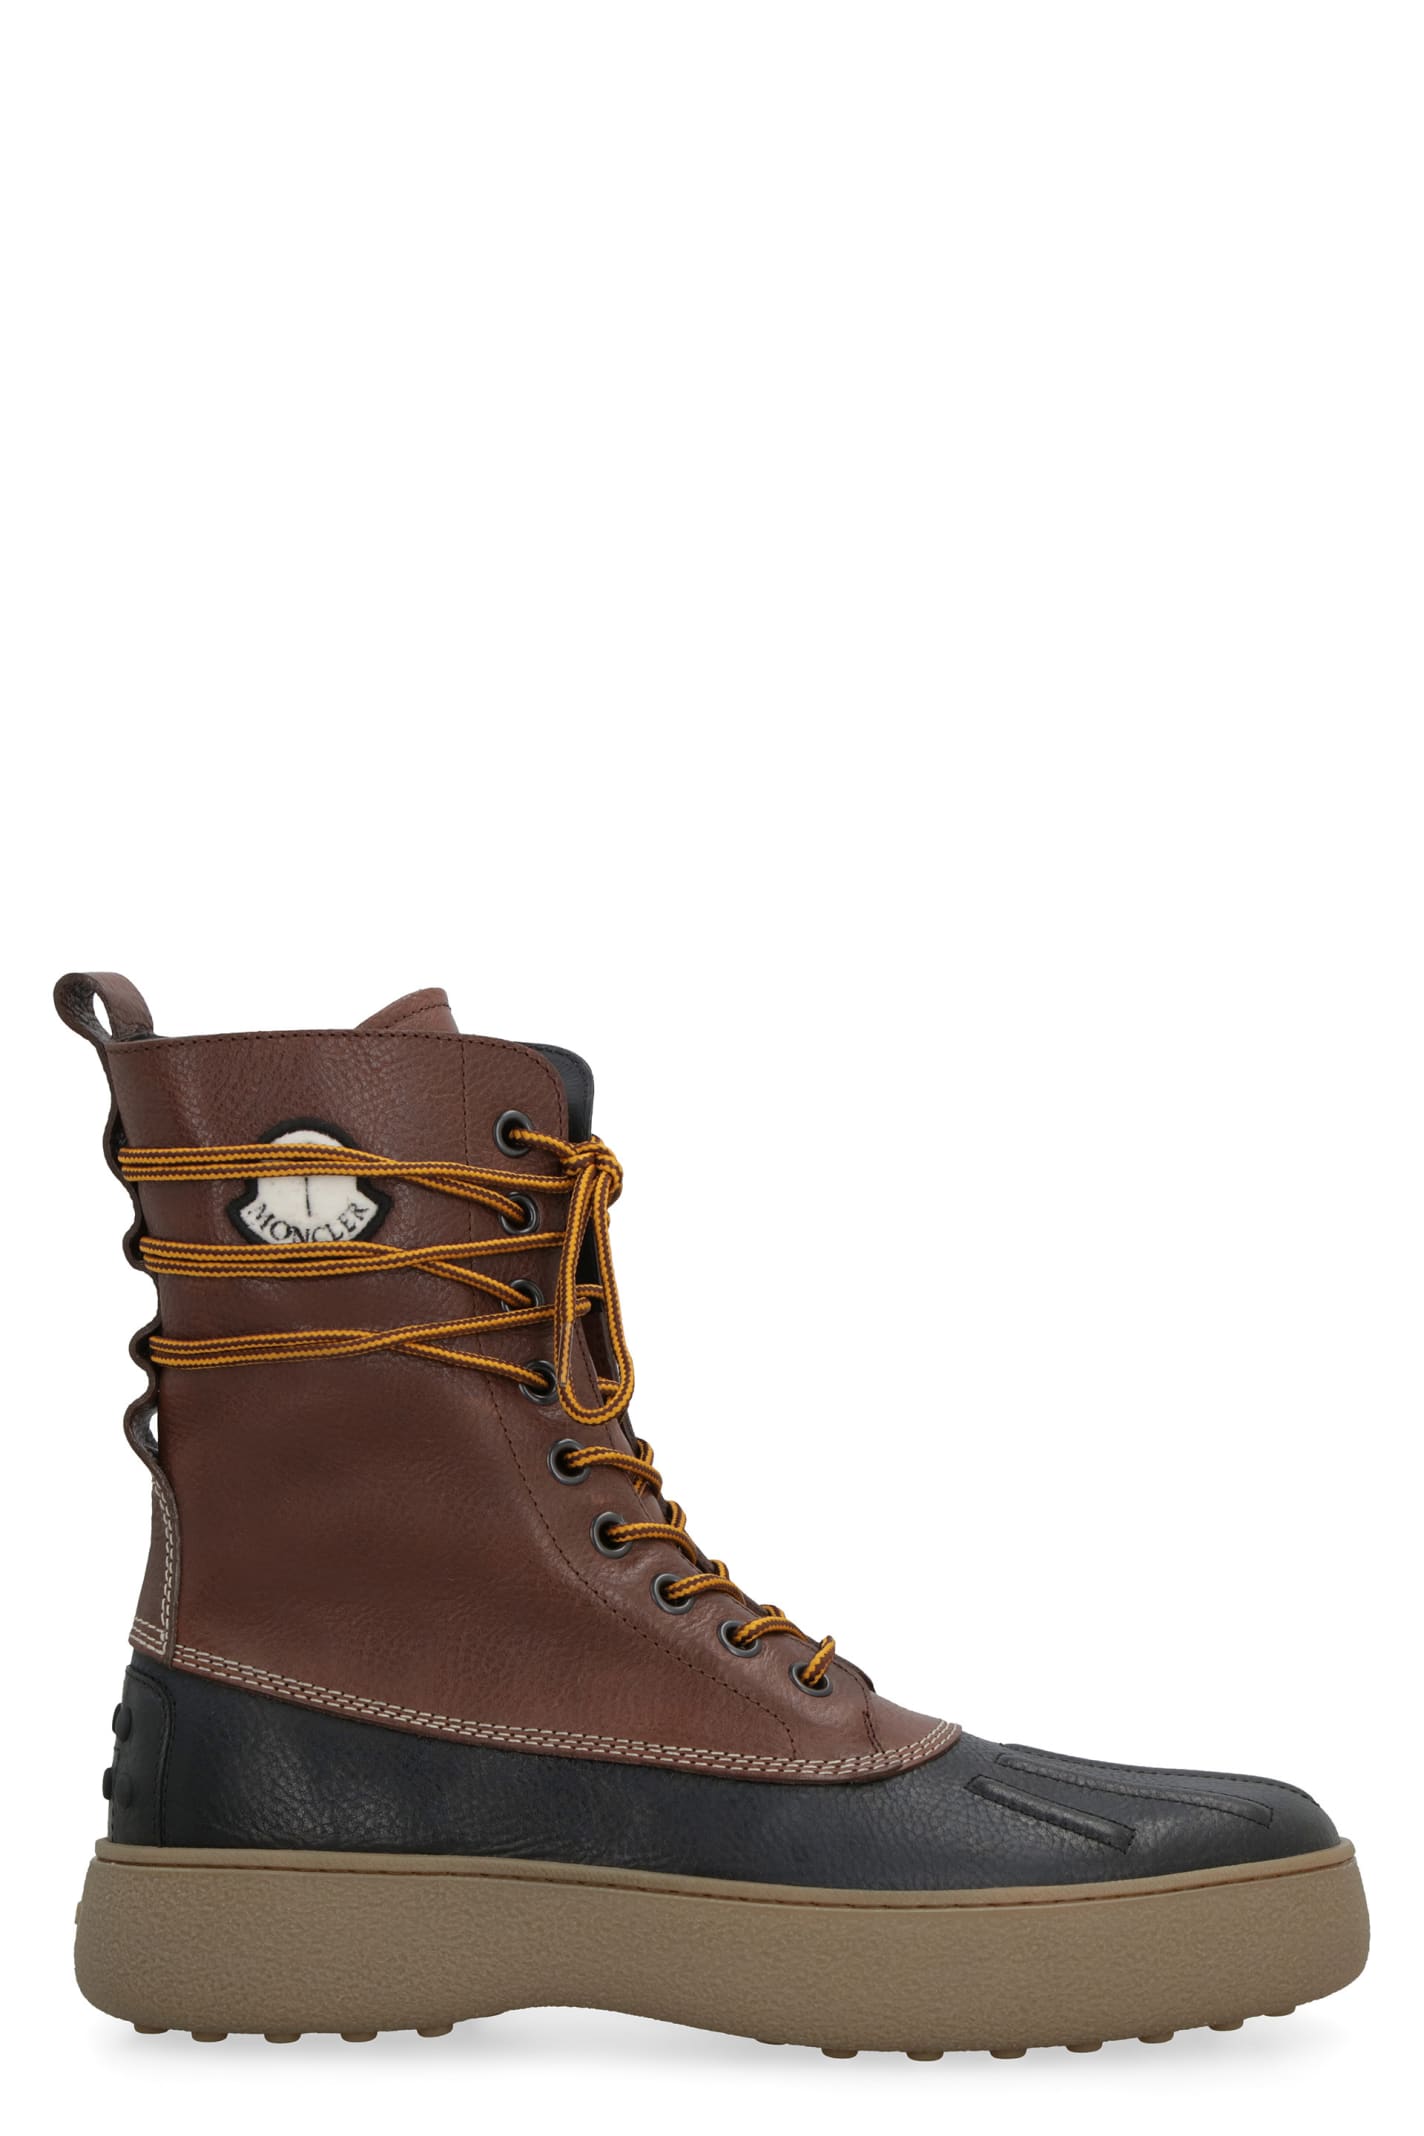 Moncler Genius Tods X 8 Moncler Palm Angels - Winter Gommino Leather Boots In Brown